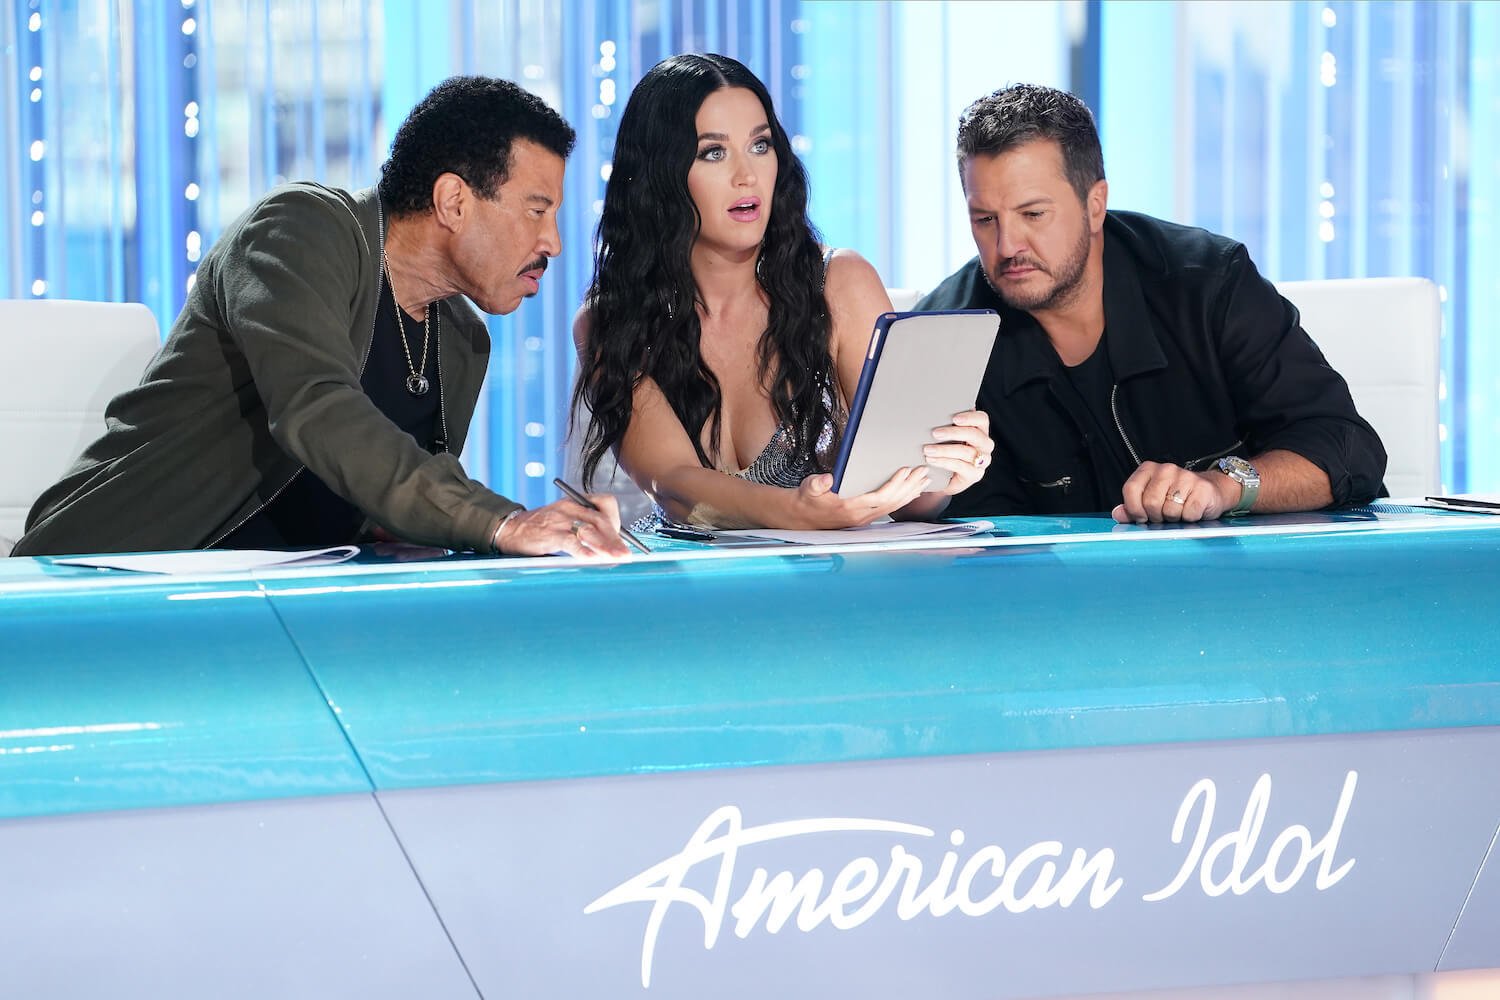 'American Idol' judges Lionel Richie, Katy Perry, and Luke Bryan reading from a notebook and looking surprised